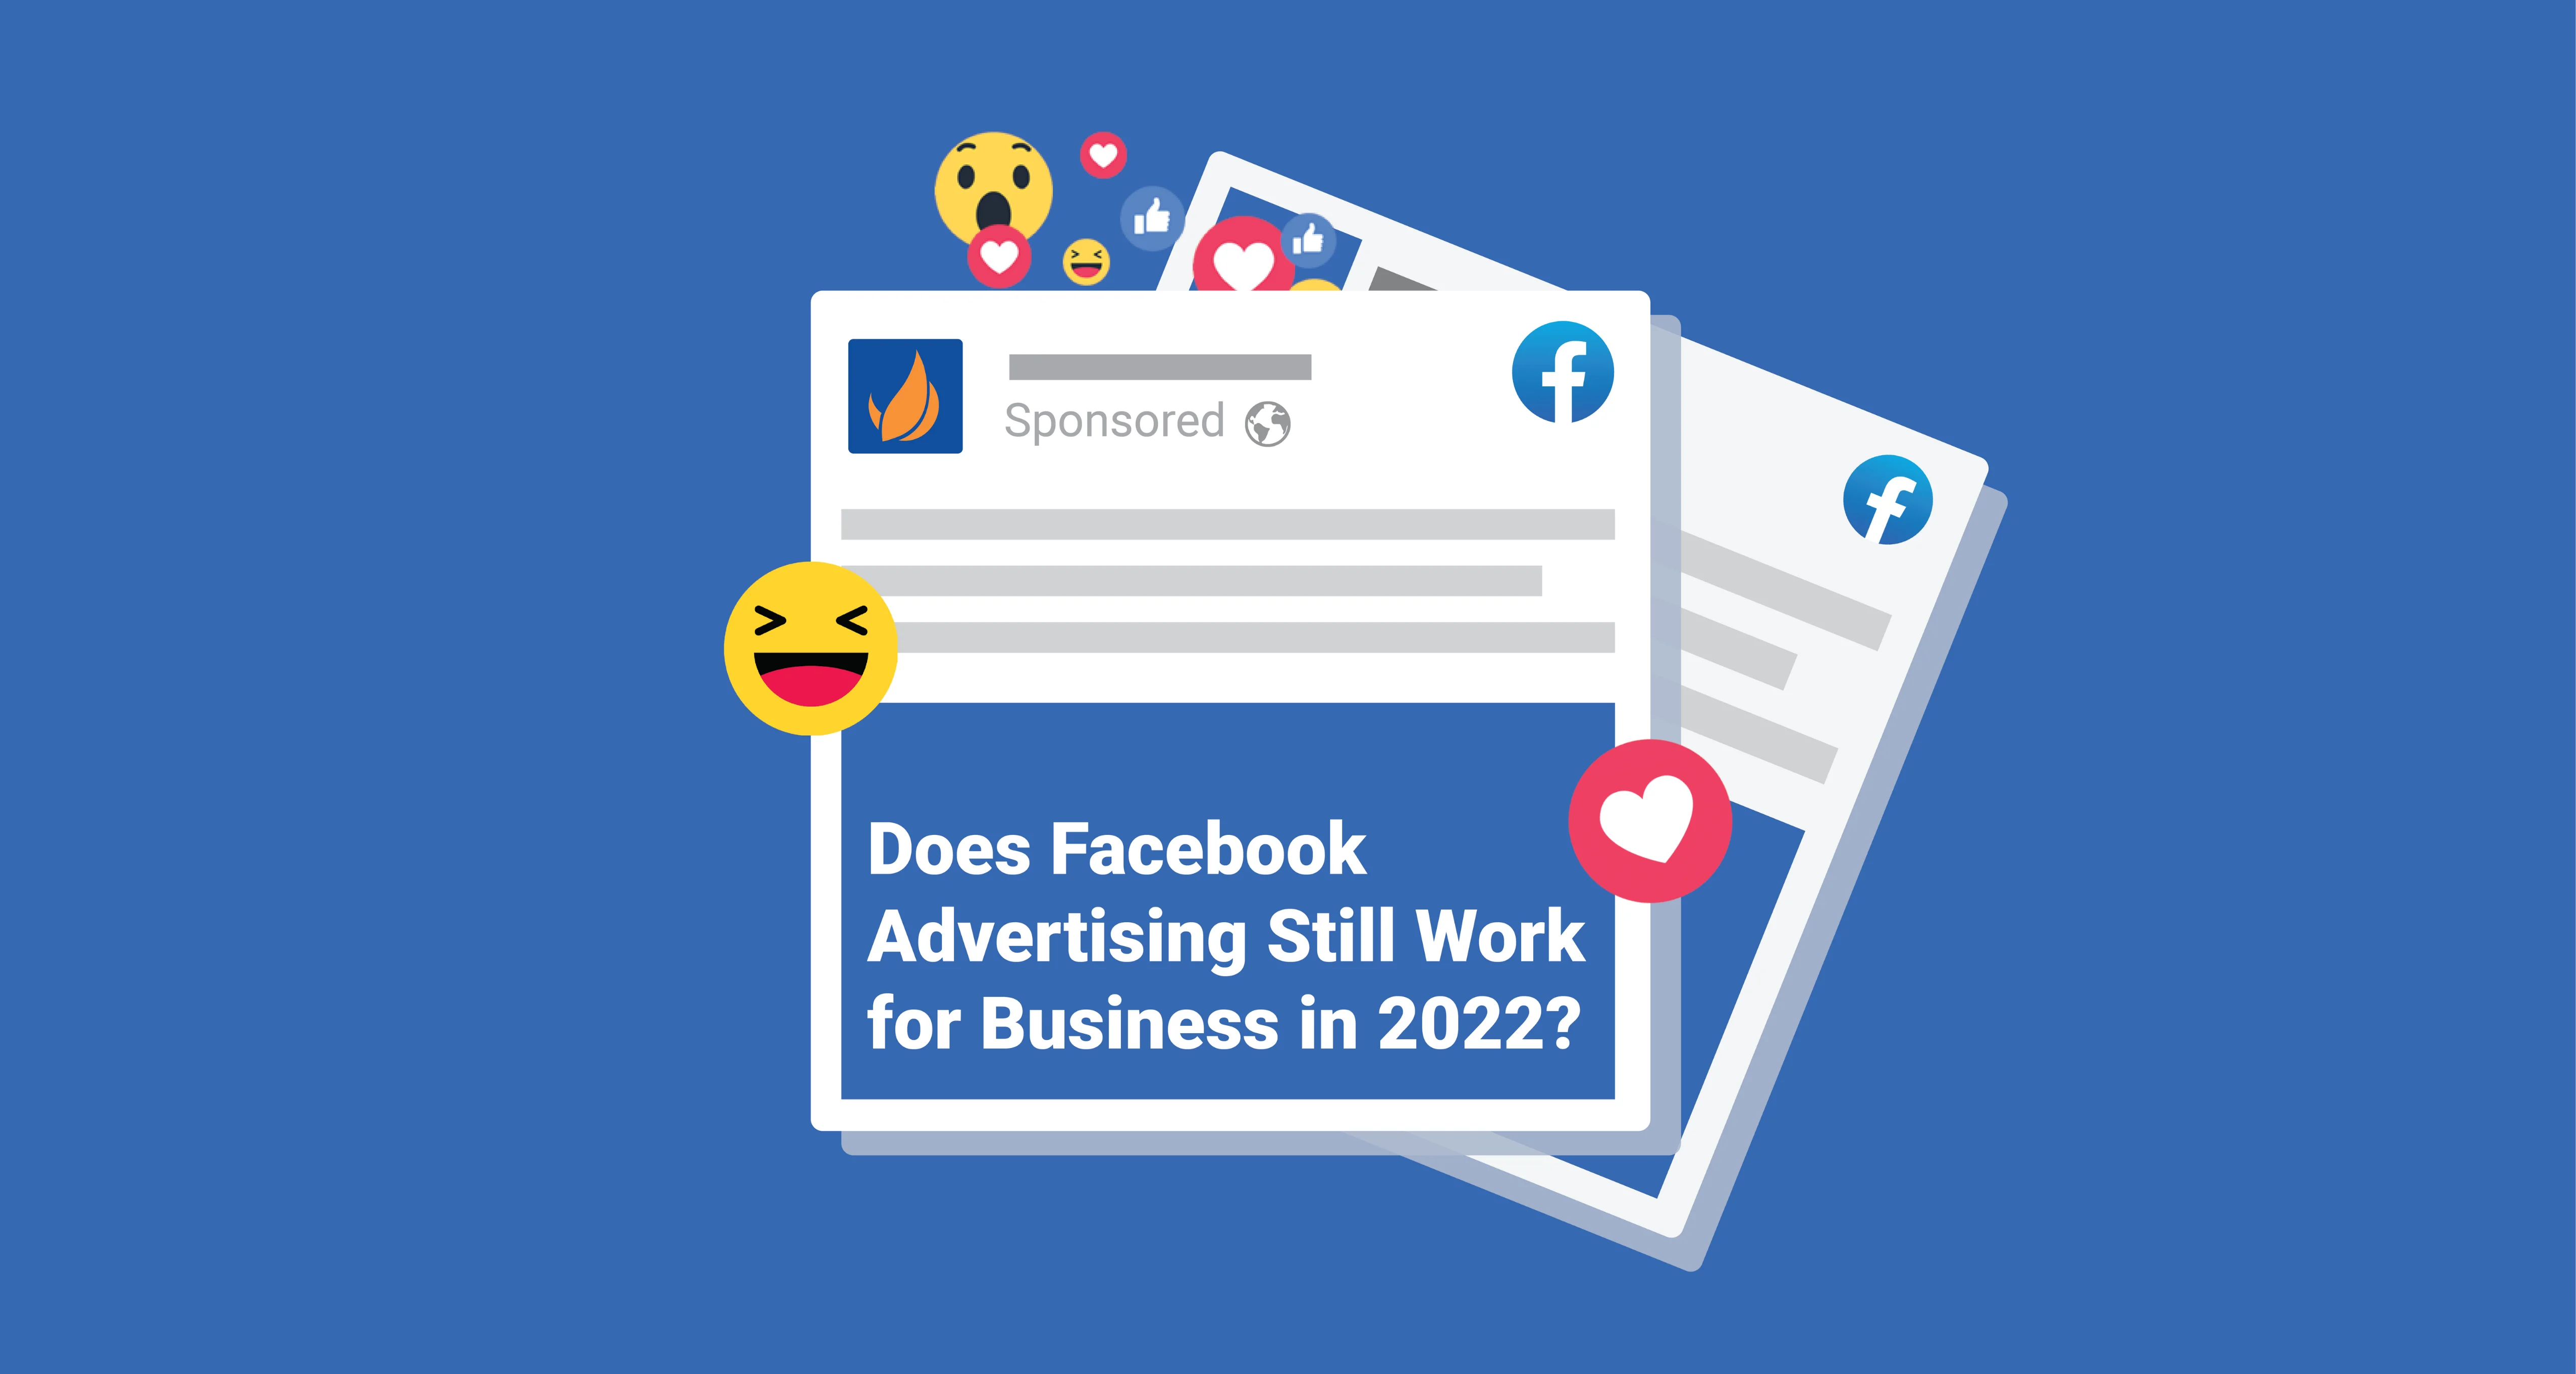 Does Facebook Advertising Still Work for Business in 2022?